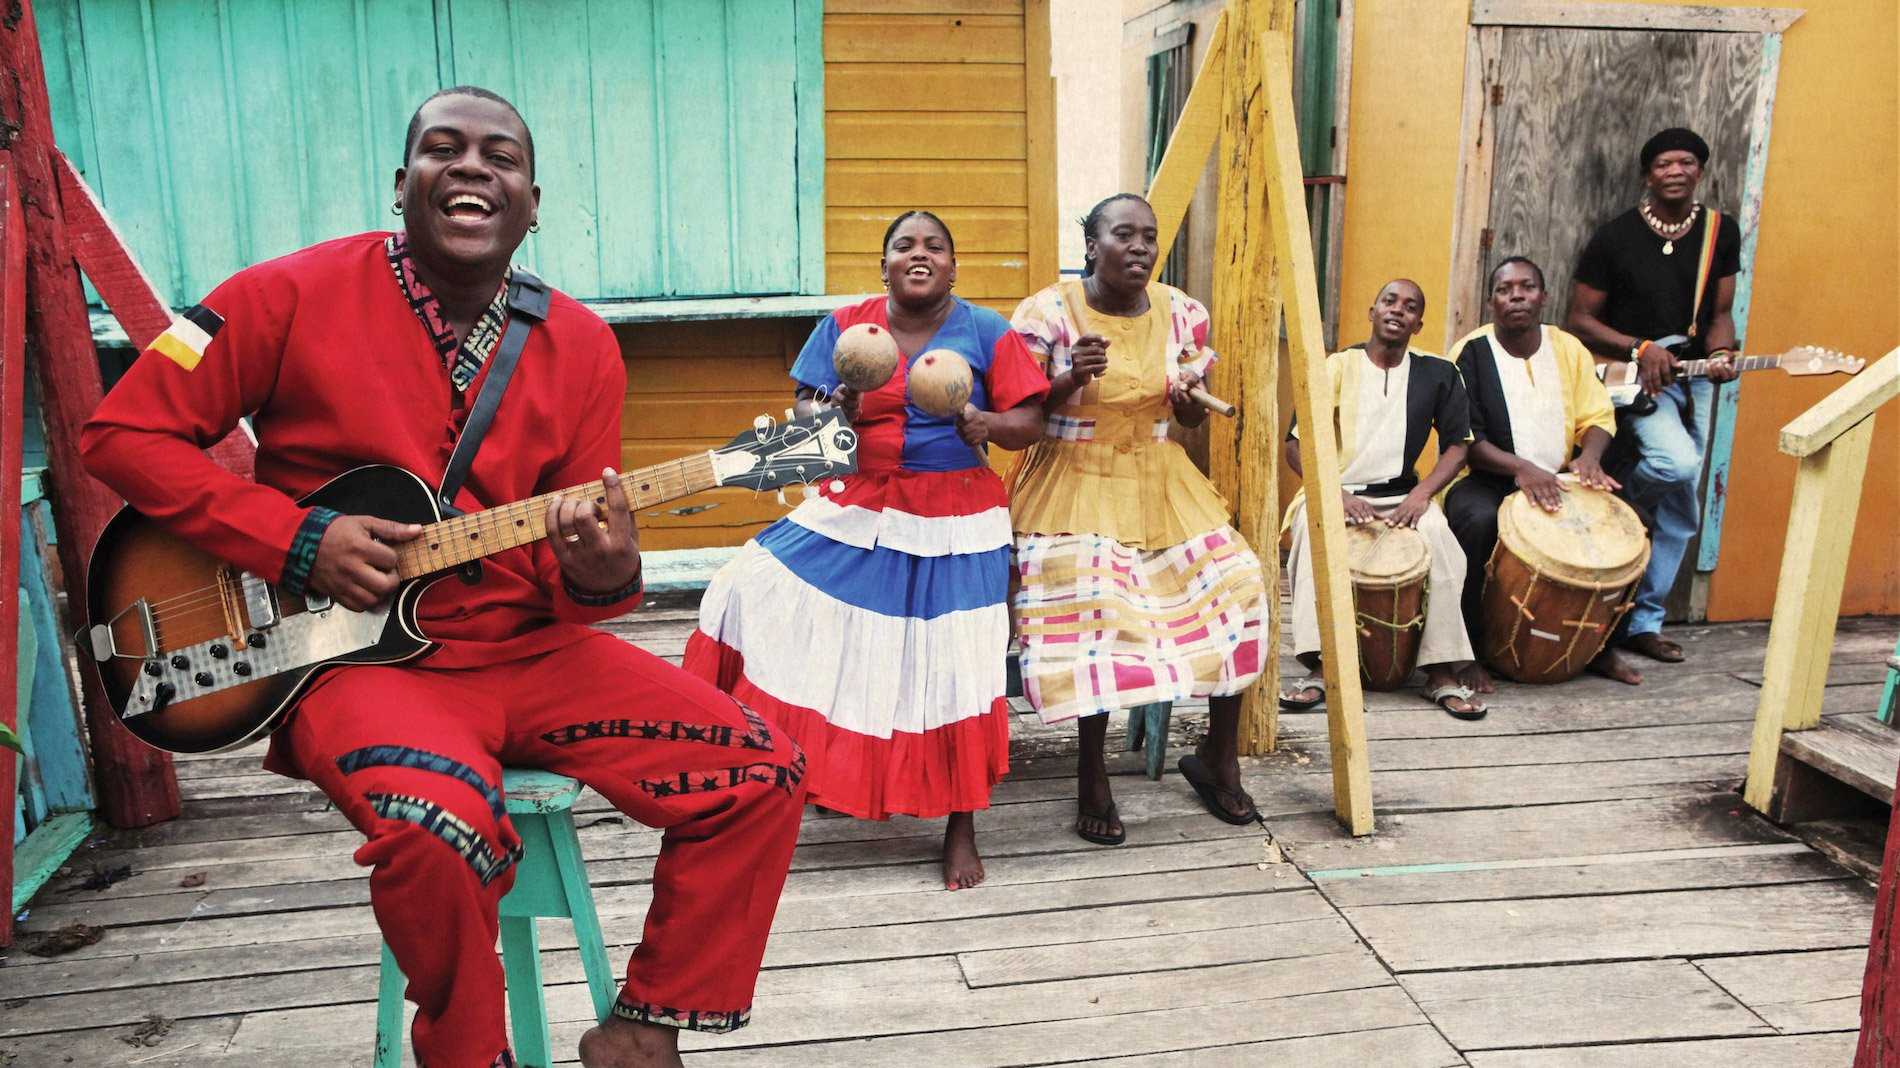 Members of Belize's The Garifuna Collective perform